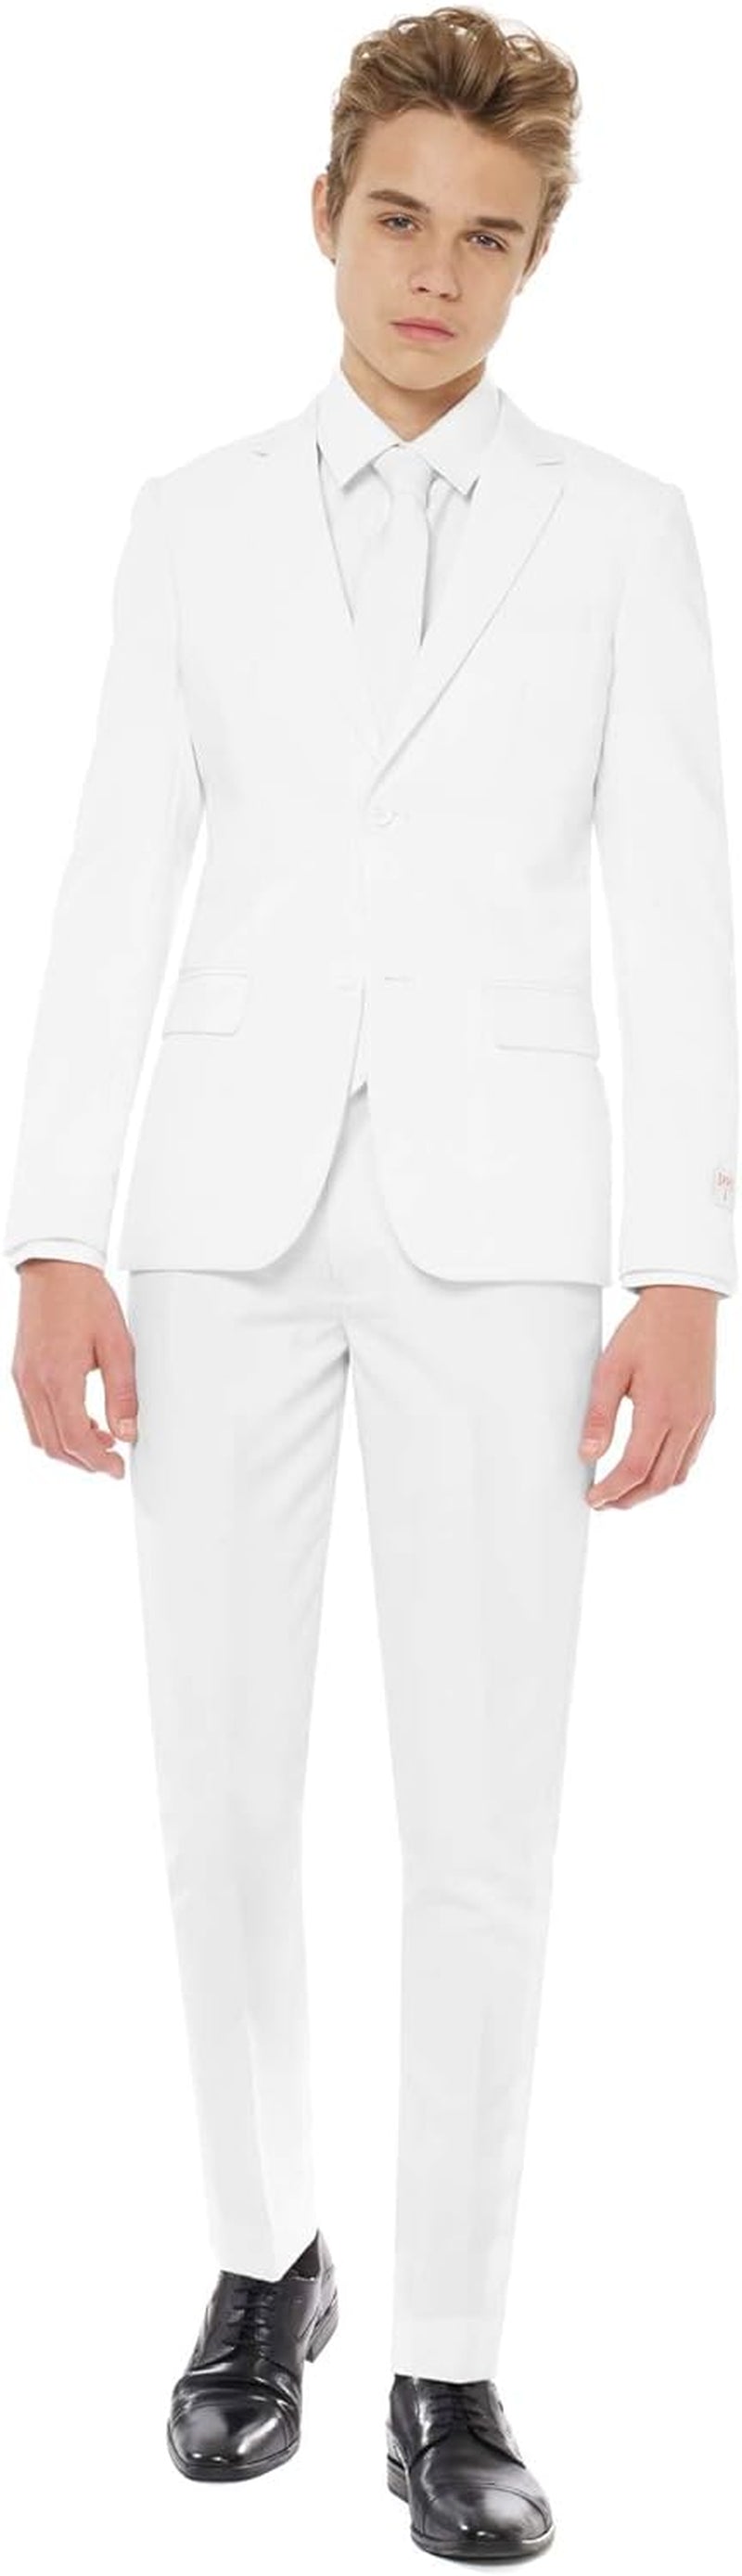 Teen Boys Solid Color Party Suit - Prom and Wedding Party Outfit - Including Blazer, Pants and Tie